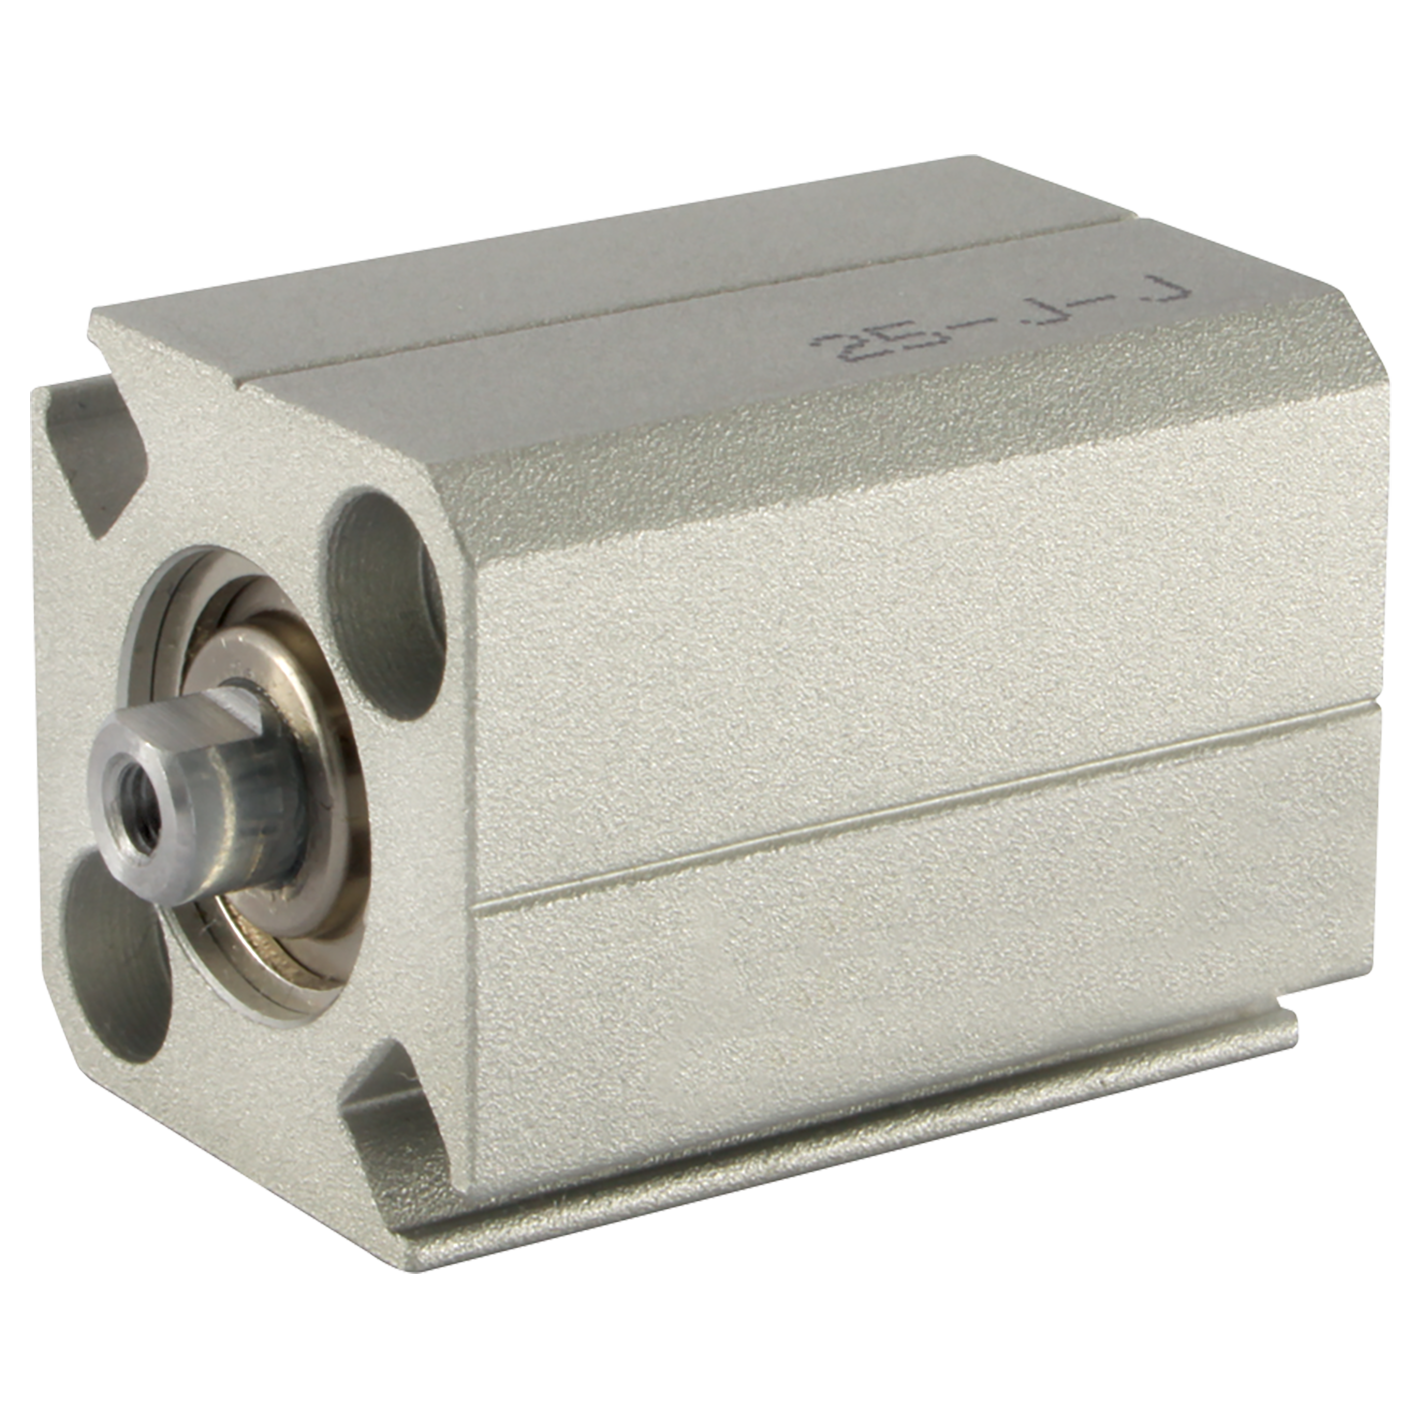 1/4" BSP Parallel Female Ports Pneumatic Cylinder Compact Cylinder